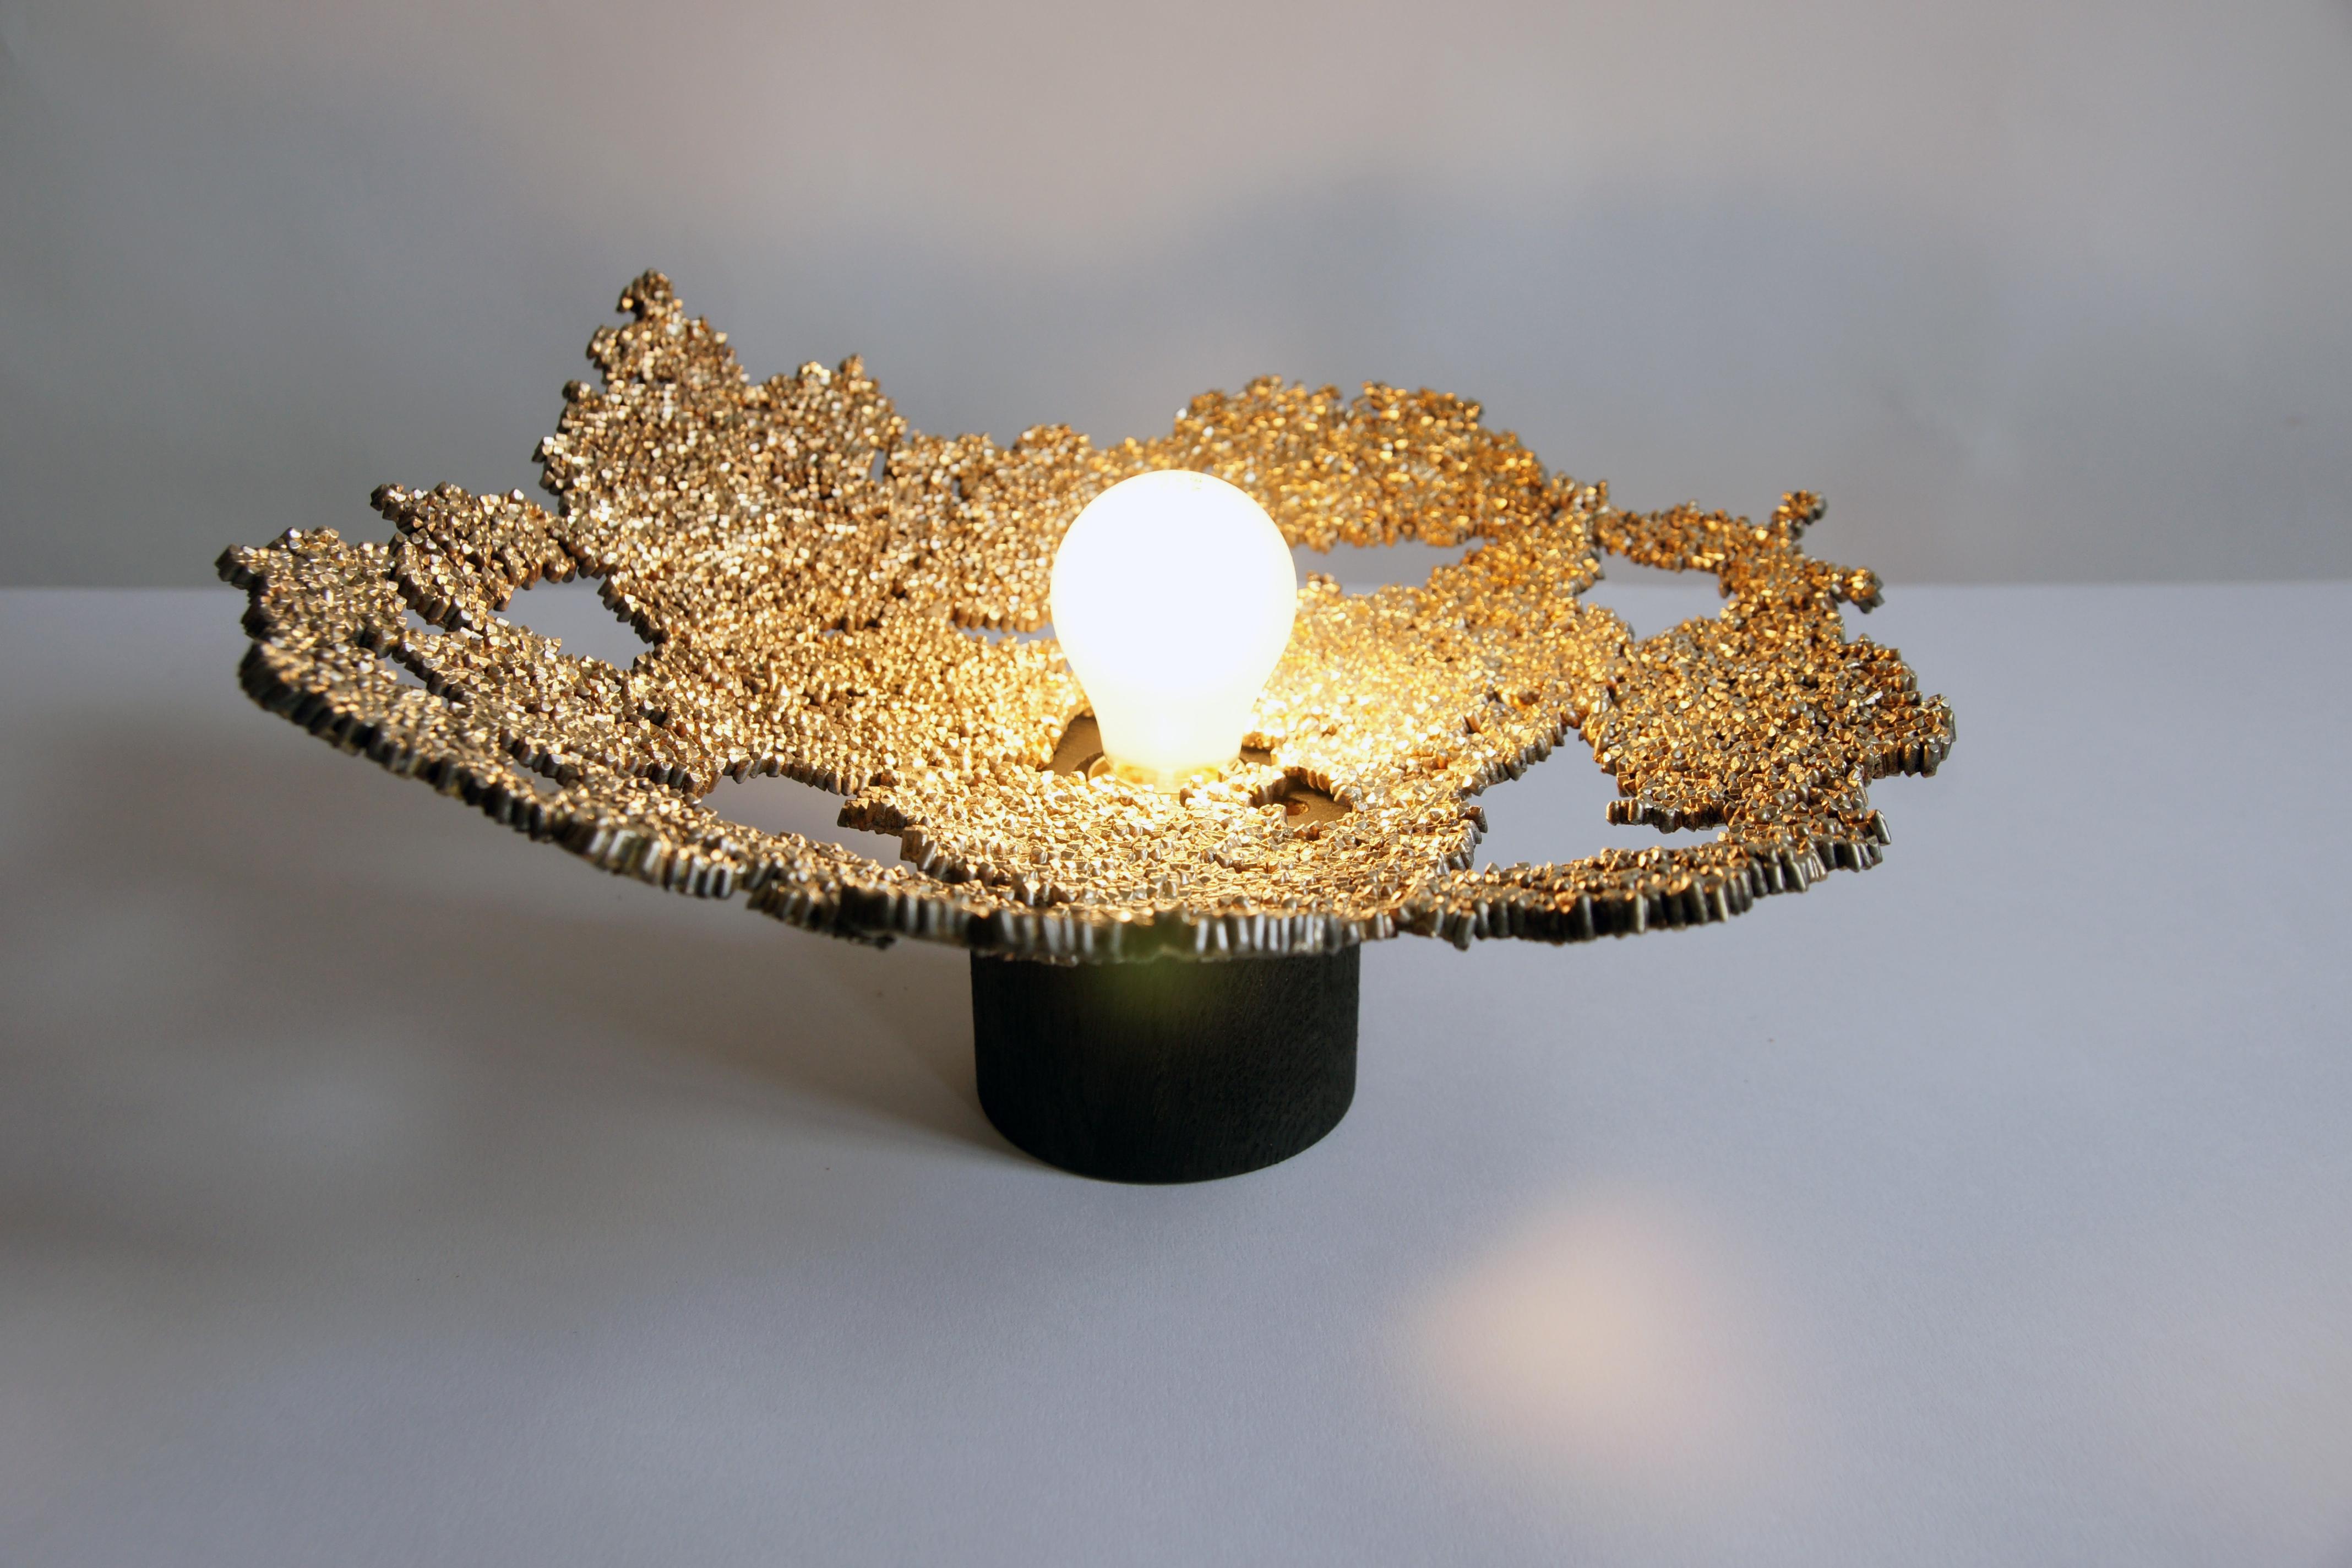 Reflect 2 by Johannes Hemann
Materials: Brass, steel, oak
Dimensions: Ø 36 x H 16 cm.

The wall- ceiling - floor light reflect#2 is made from hundreds of 3mm steel wires. The steel wire is cut into tiny pieces by hand. Each and every wire piece